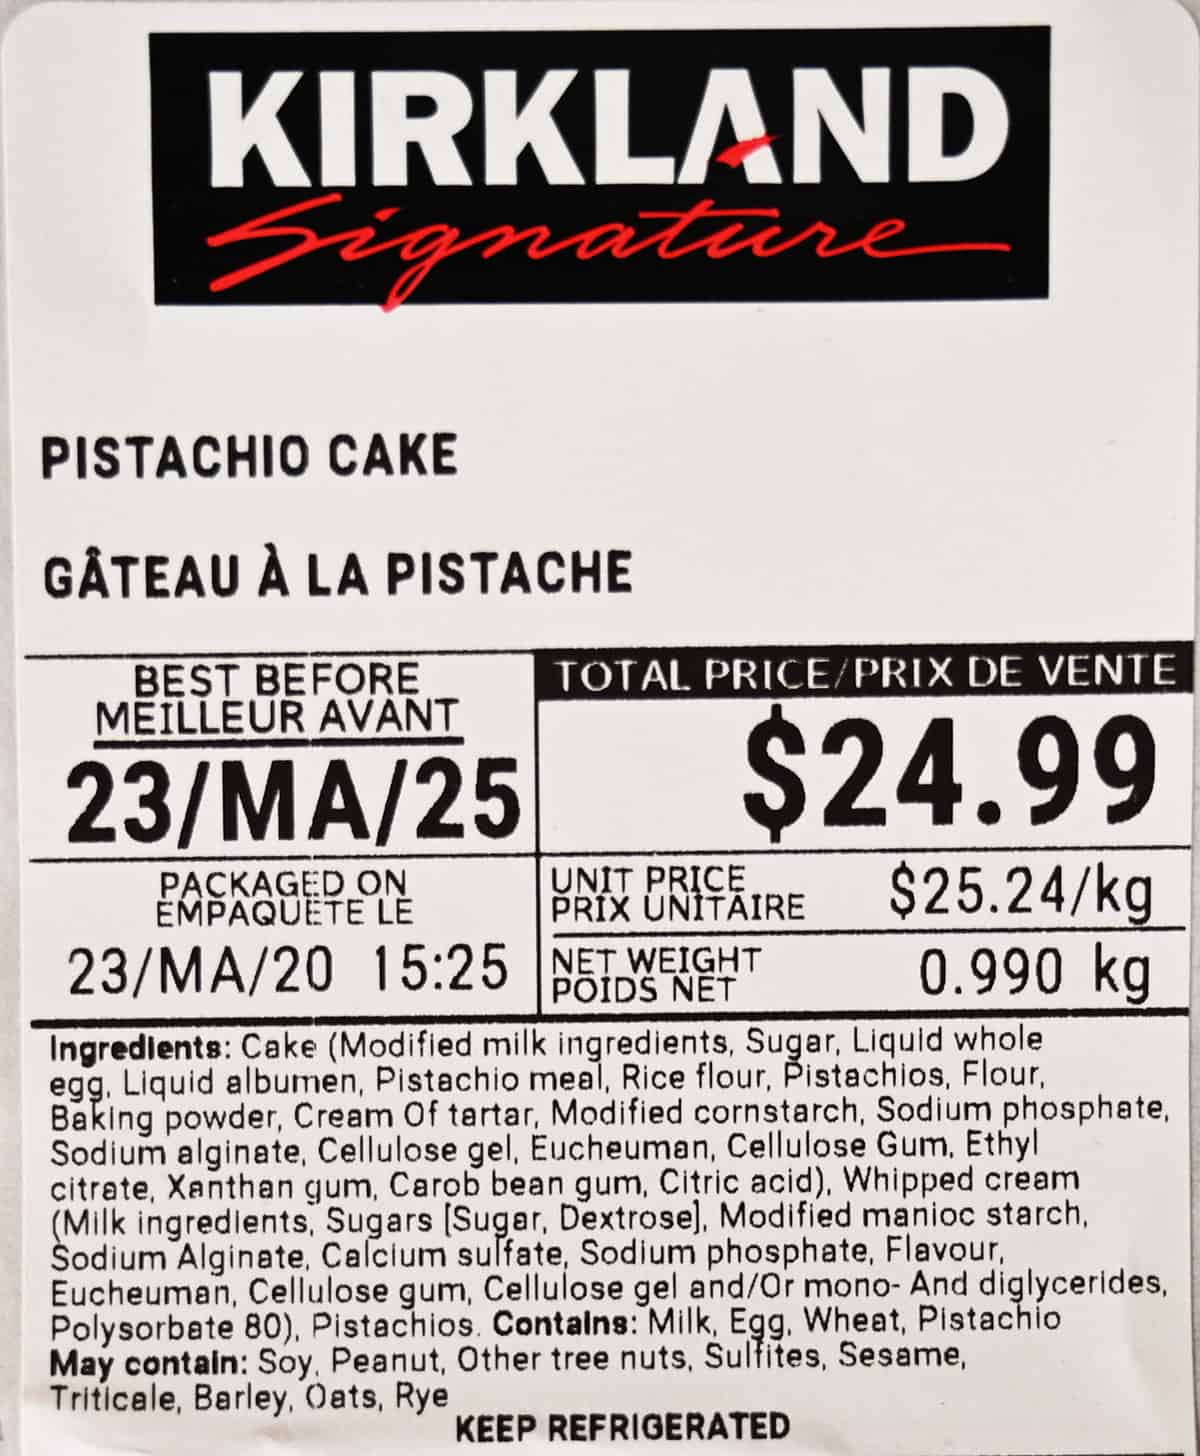 Image of the label on the pistacho cake showing ingredients, cost and best before date.